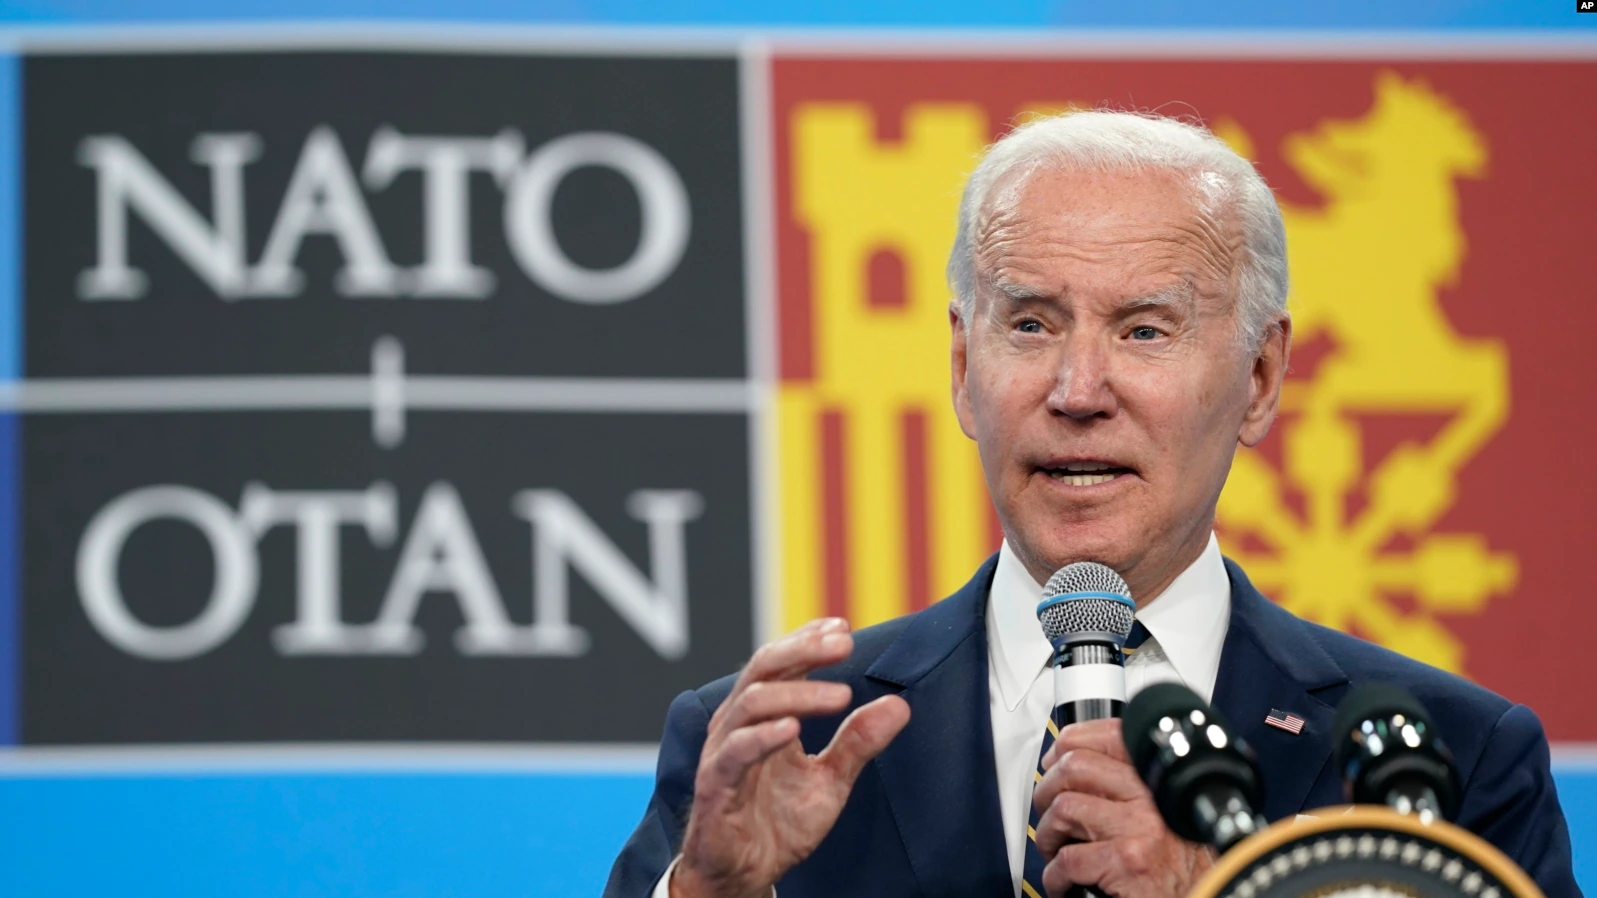 President Joe Biden speaks during a news conference on the final day of the NATO summit in Madrid, June 30, 2022.